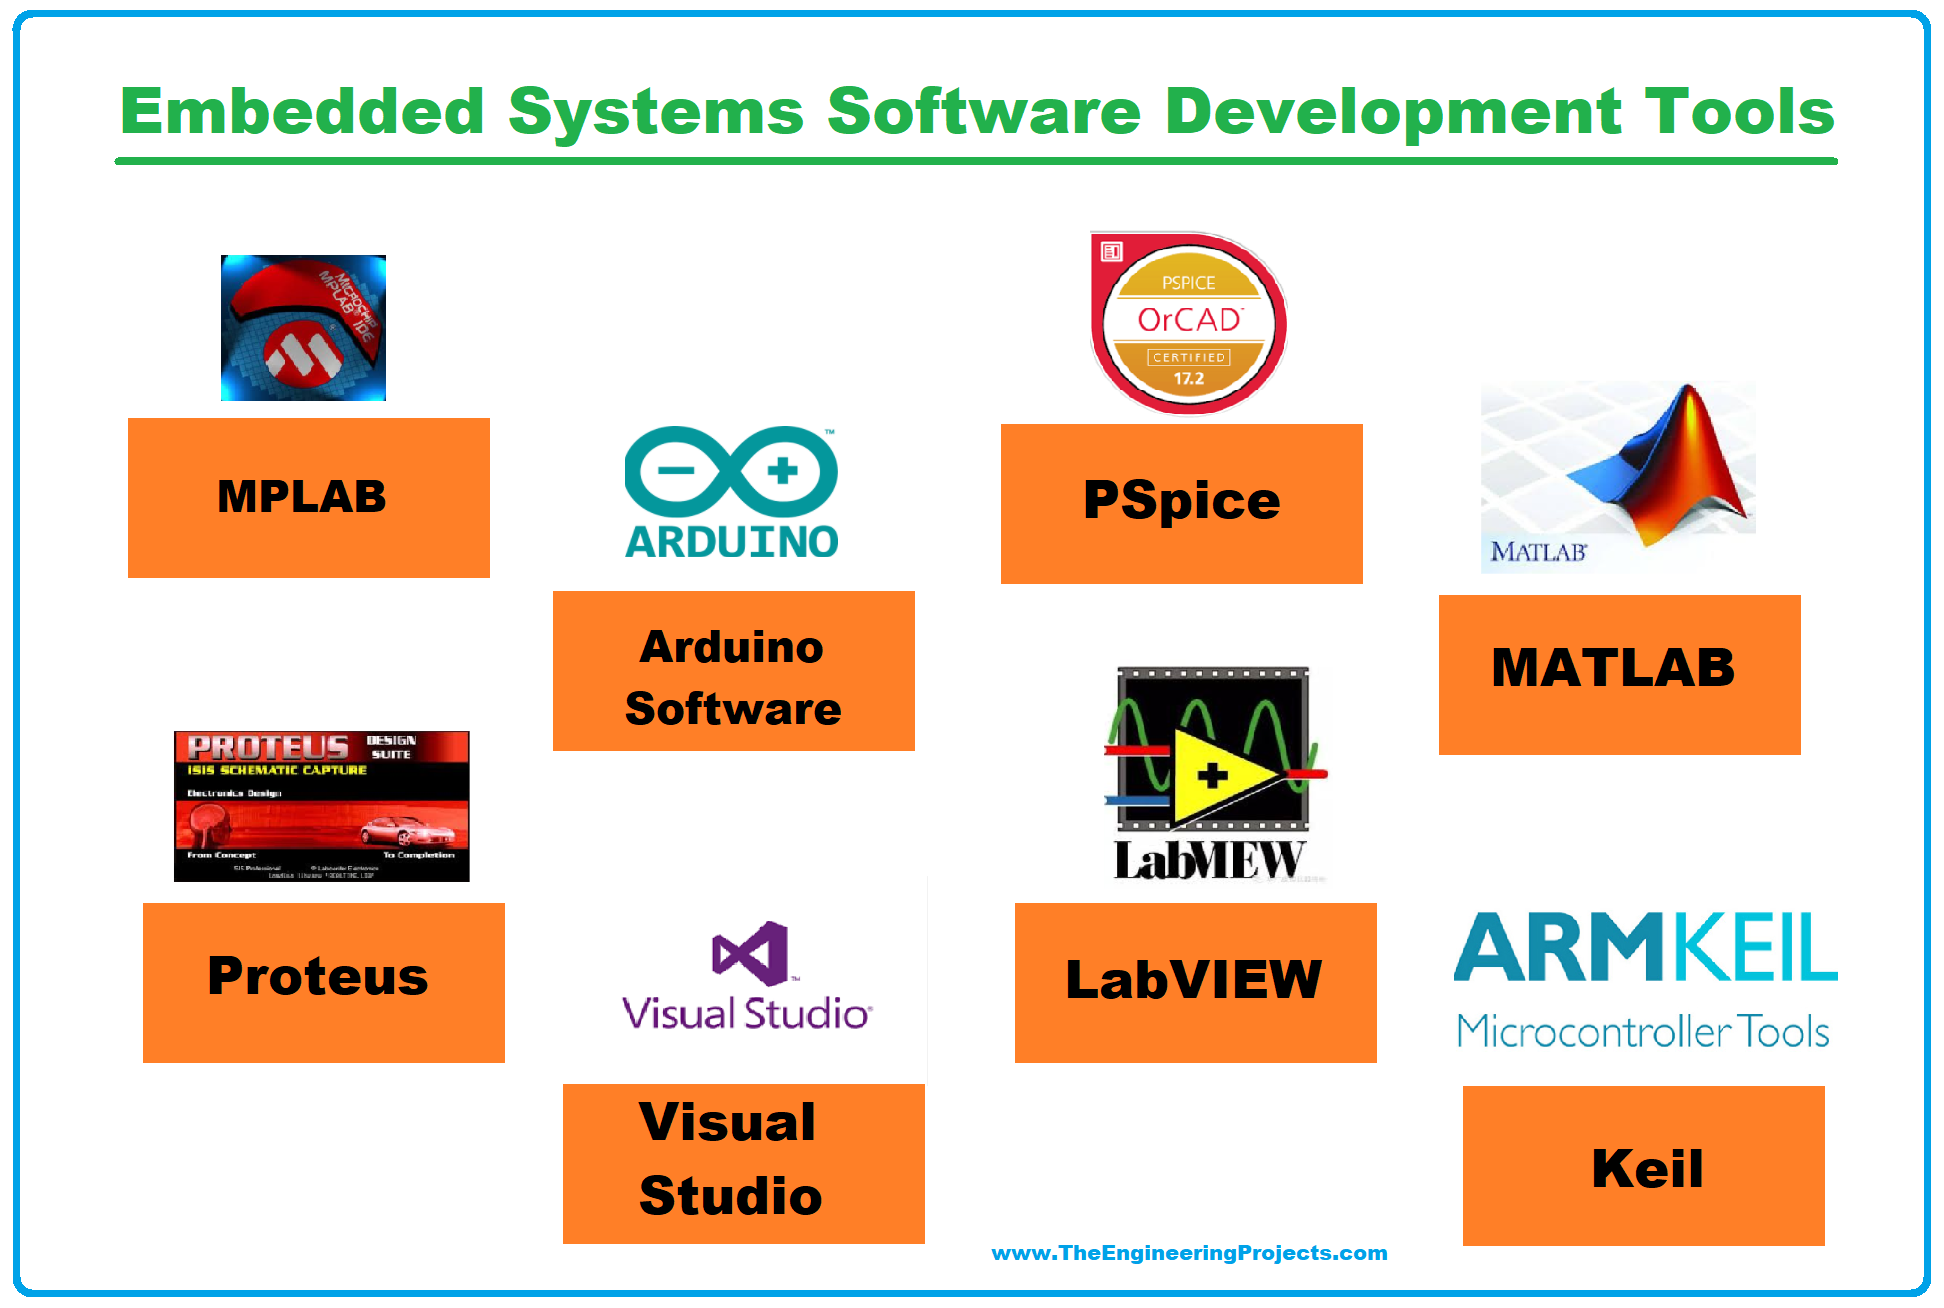 Embedded Systems Software Development Tools, Embedded Software, Integrated Development Environment, ide, embedded software tools, embedded software